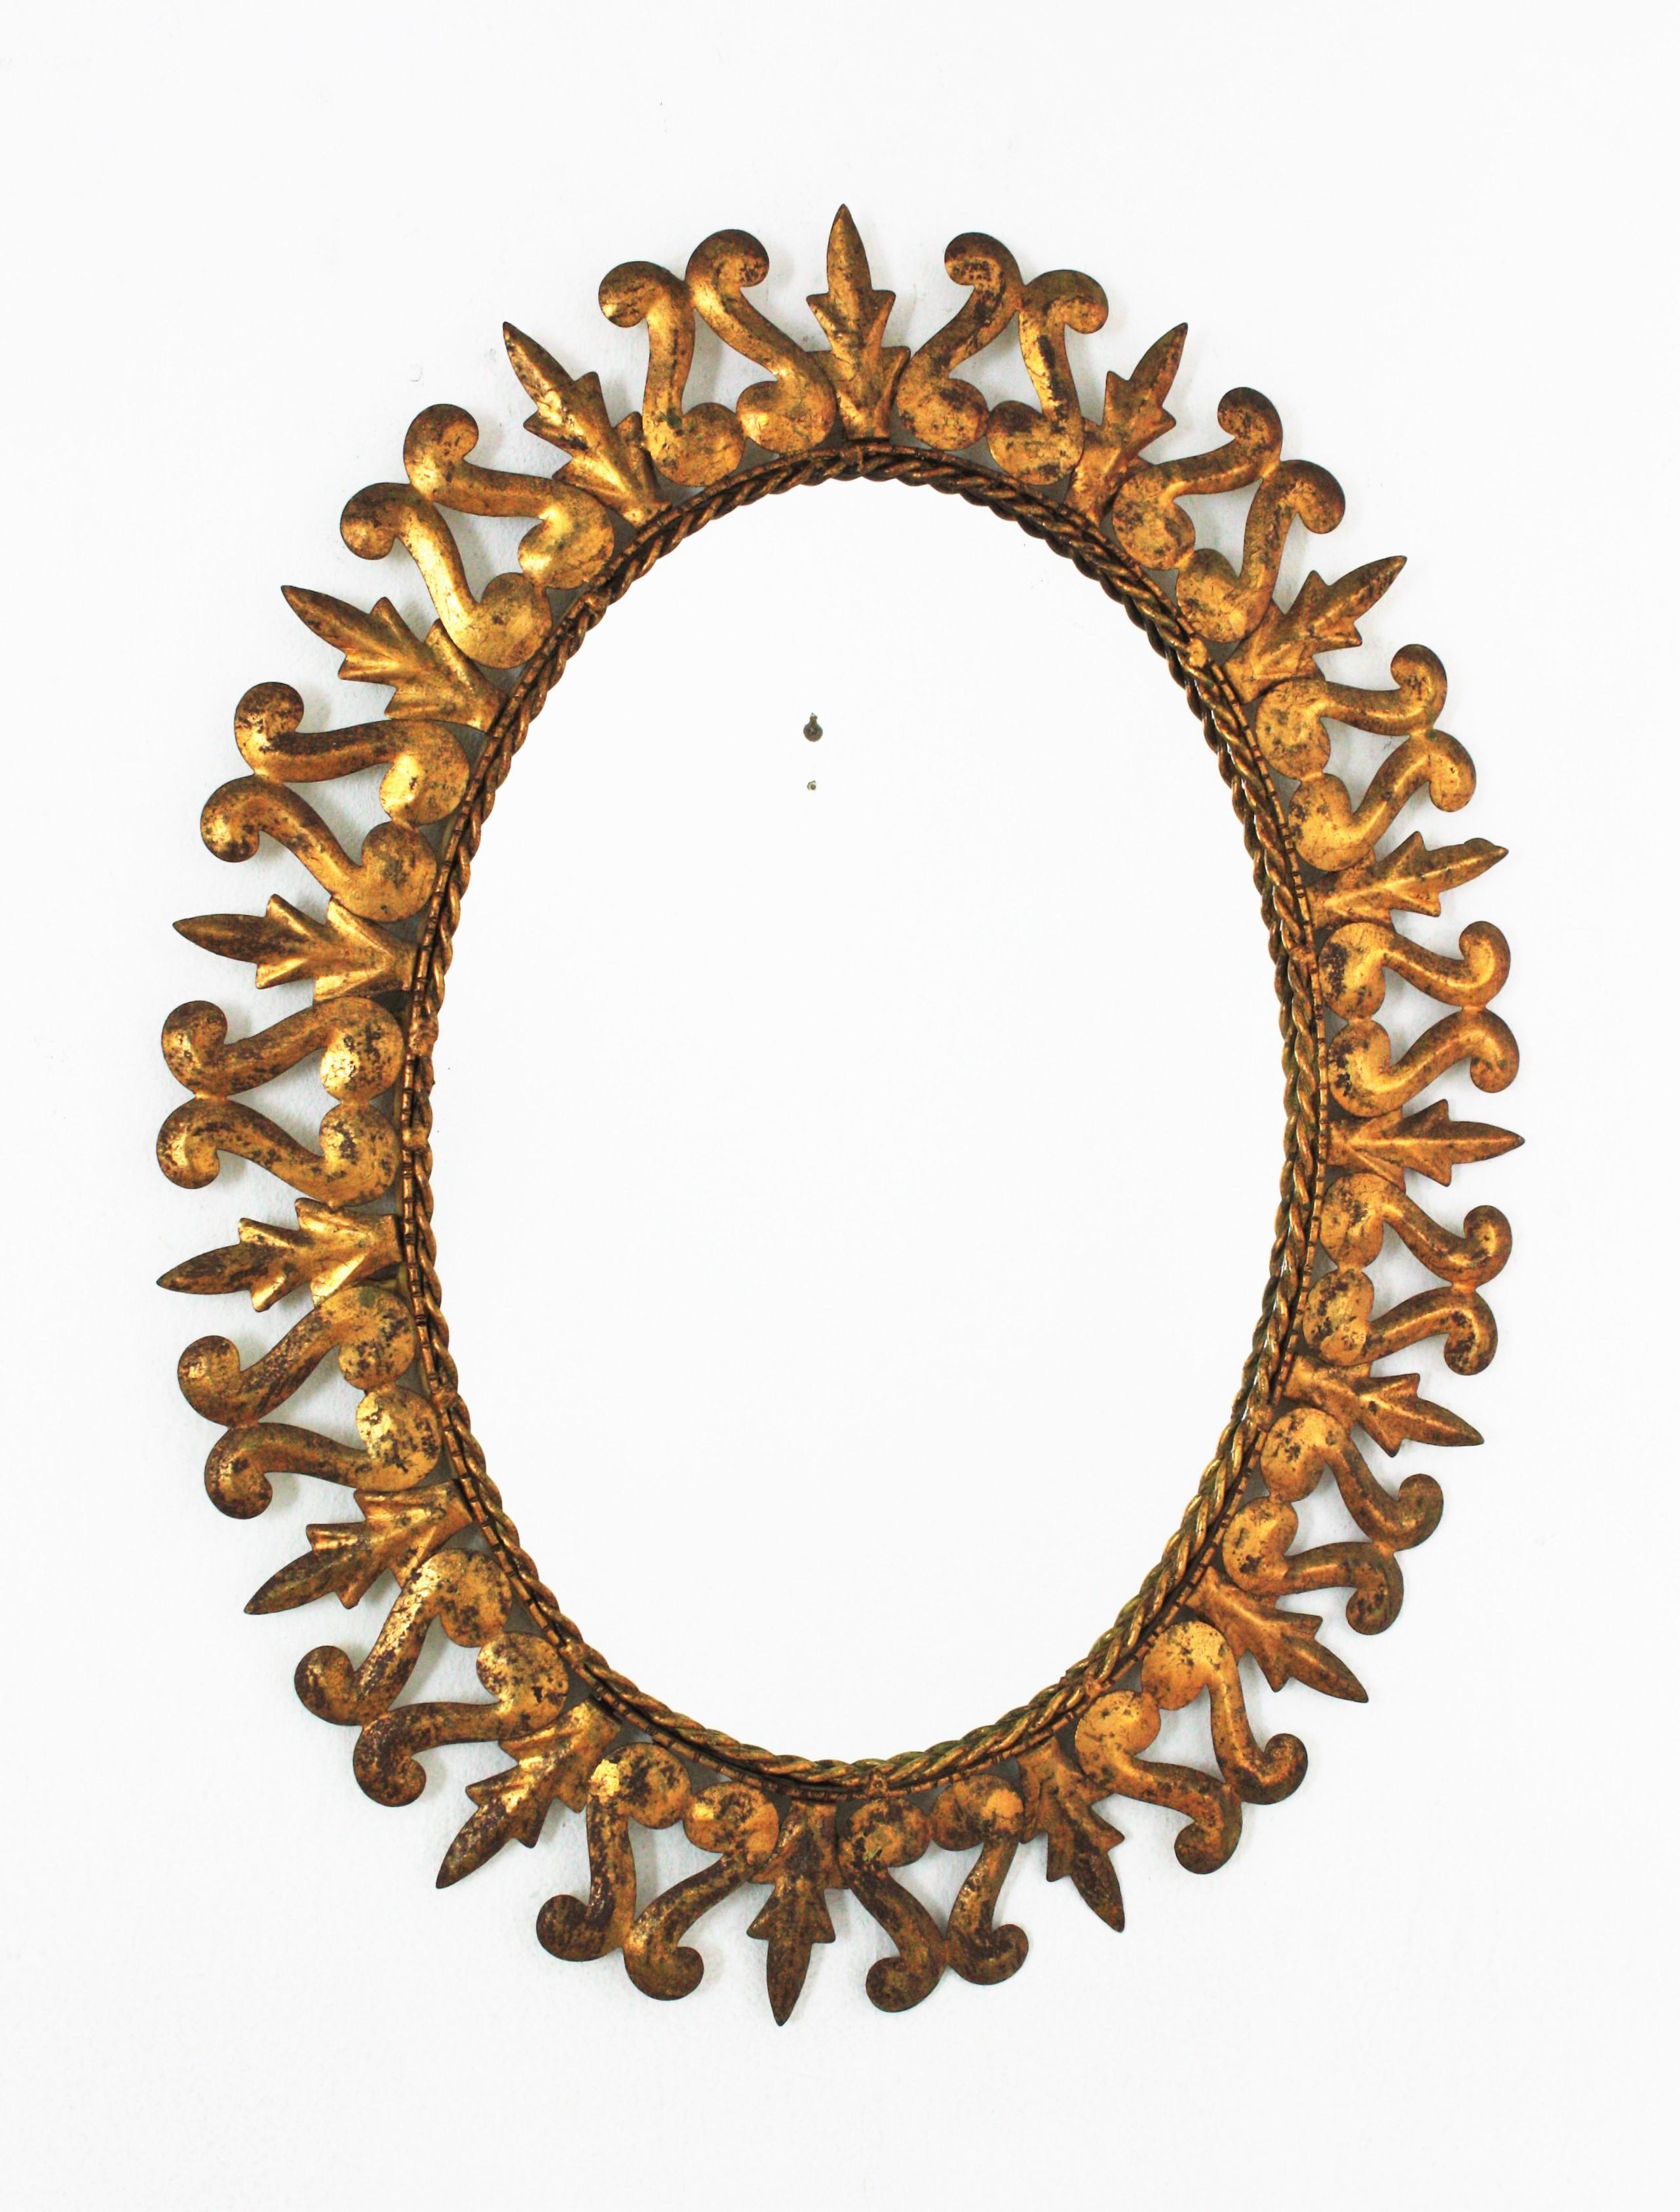 Oval sunburst mirror, Gilt iron, Gold Leaf,  Spain, 1950s
This hand-hammered iron sunburst wall mirror features a frame comprised by iron leaves alternating with scroll shaped details. It has a nice aged patina showing its original gold leaf gilding